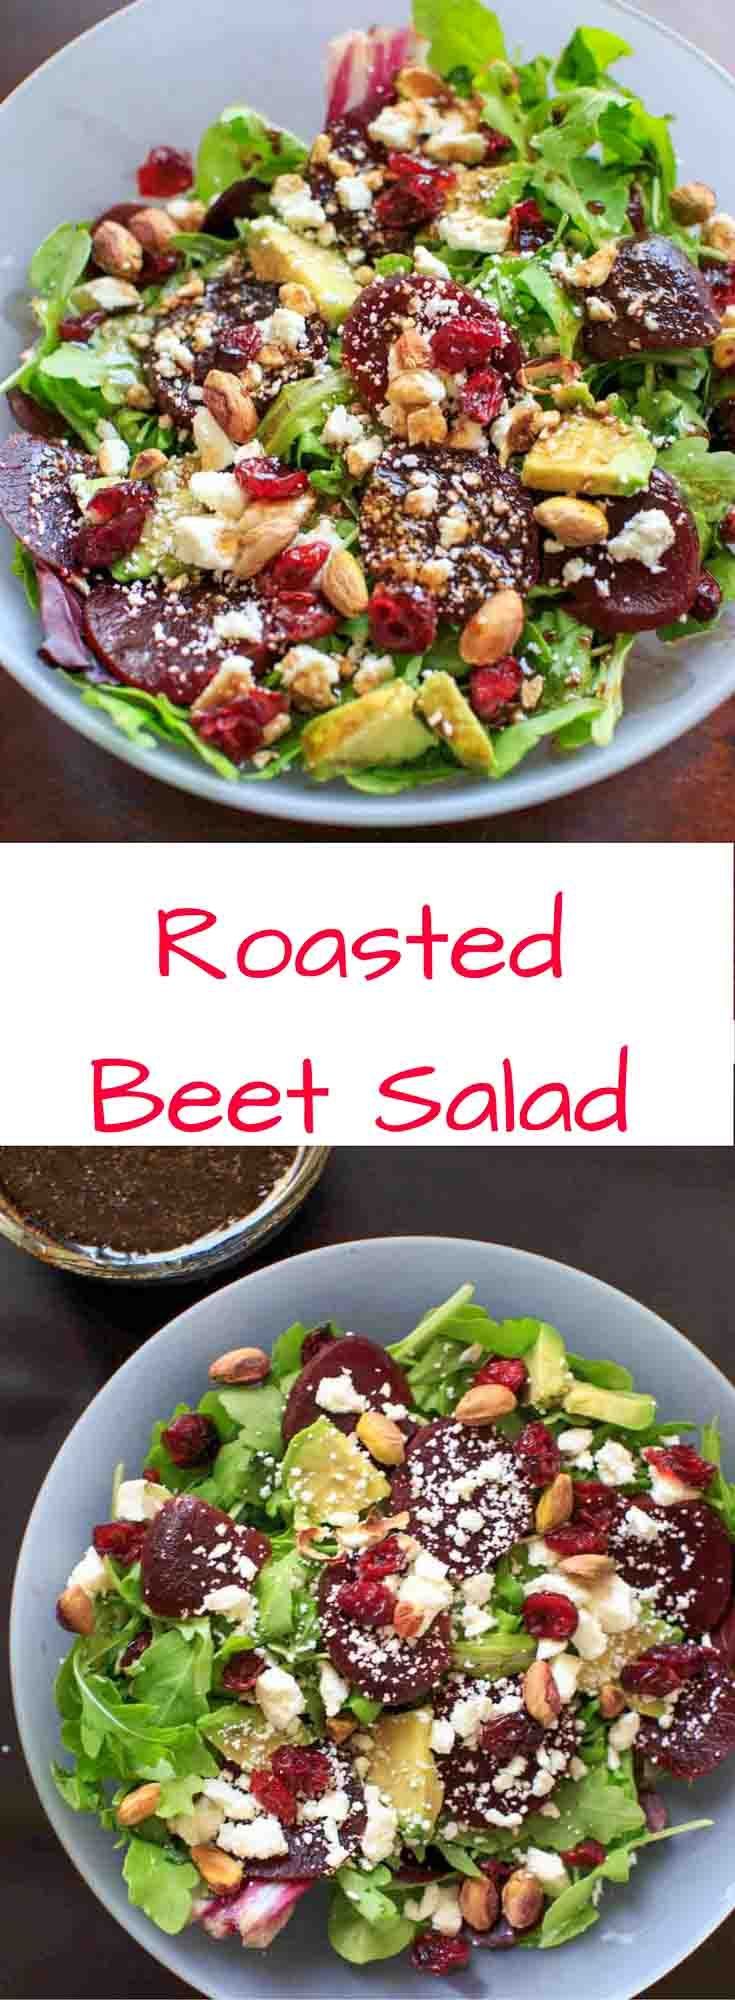 Roasted Beet Salad with Honey Balsamic Vinaigrette. A flavorful and healthy salad that is anything but boring!